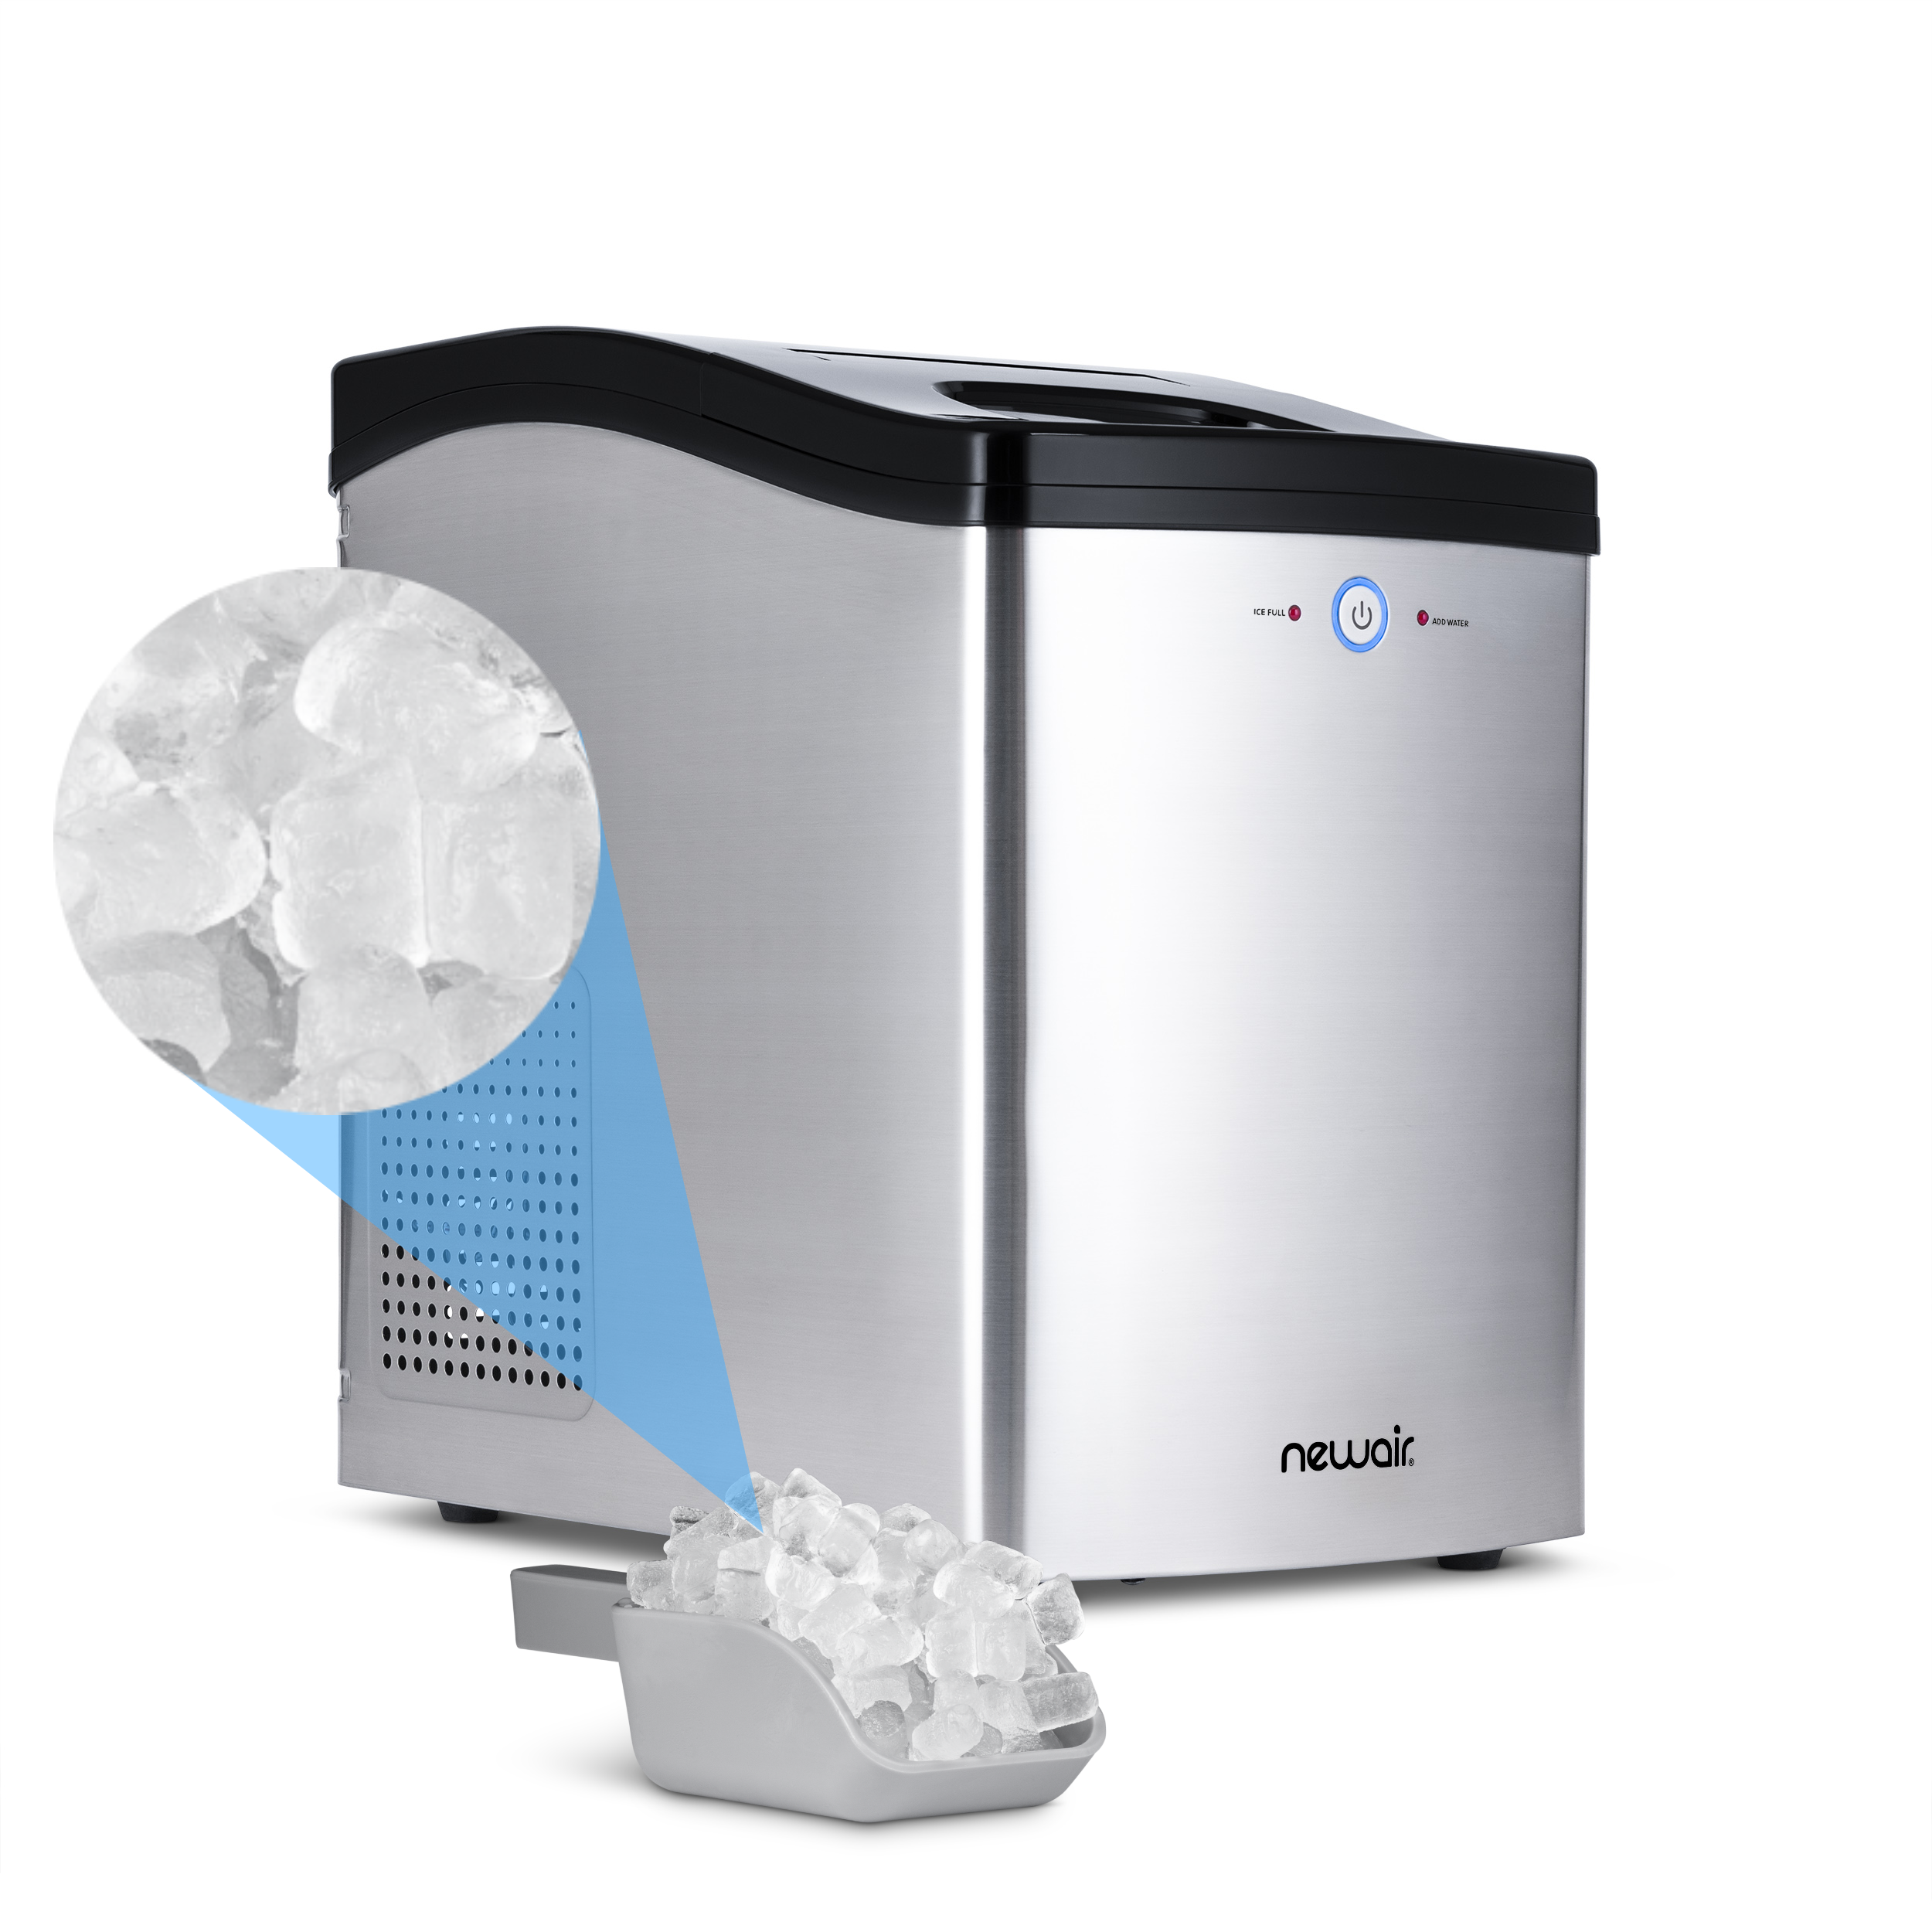 Newair 45lb. Nugget Countertop Ice Maker with Self-Cleaning Function